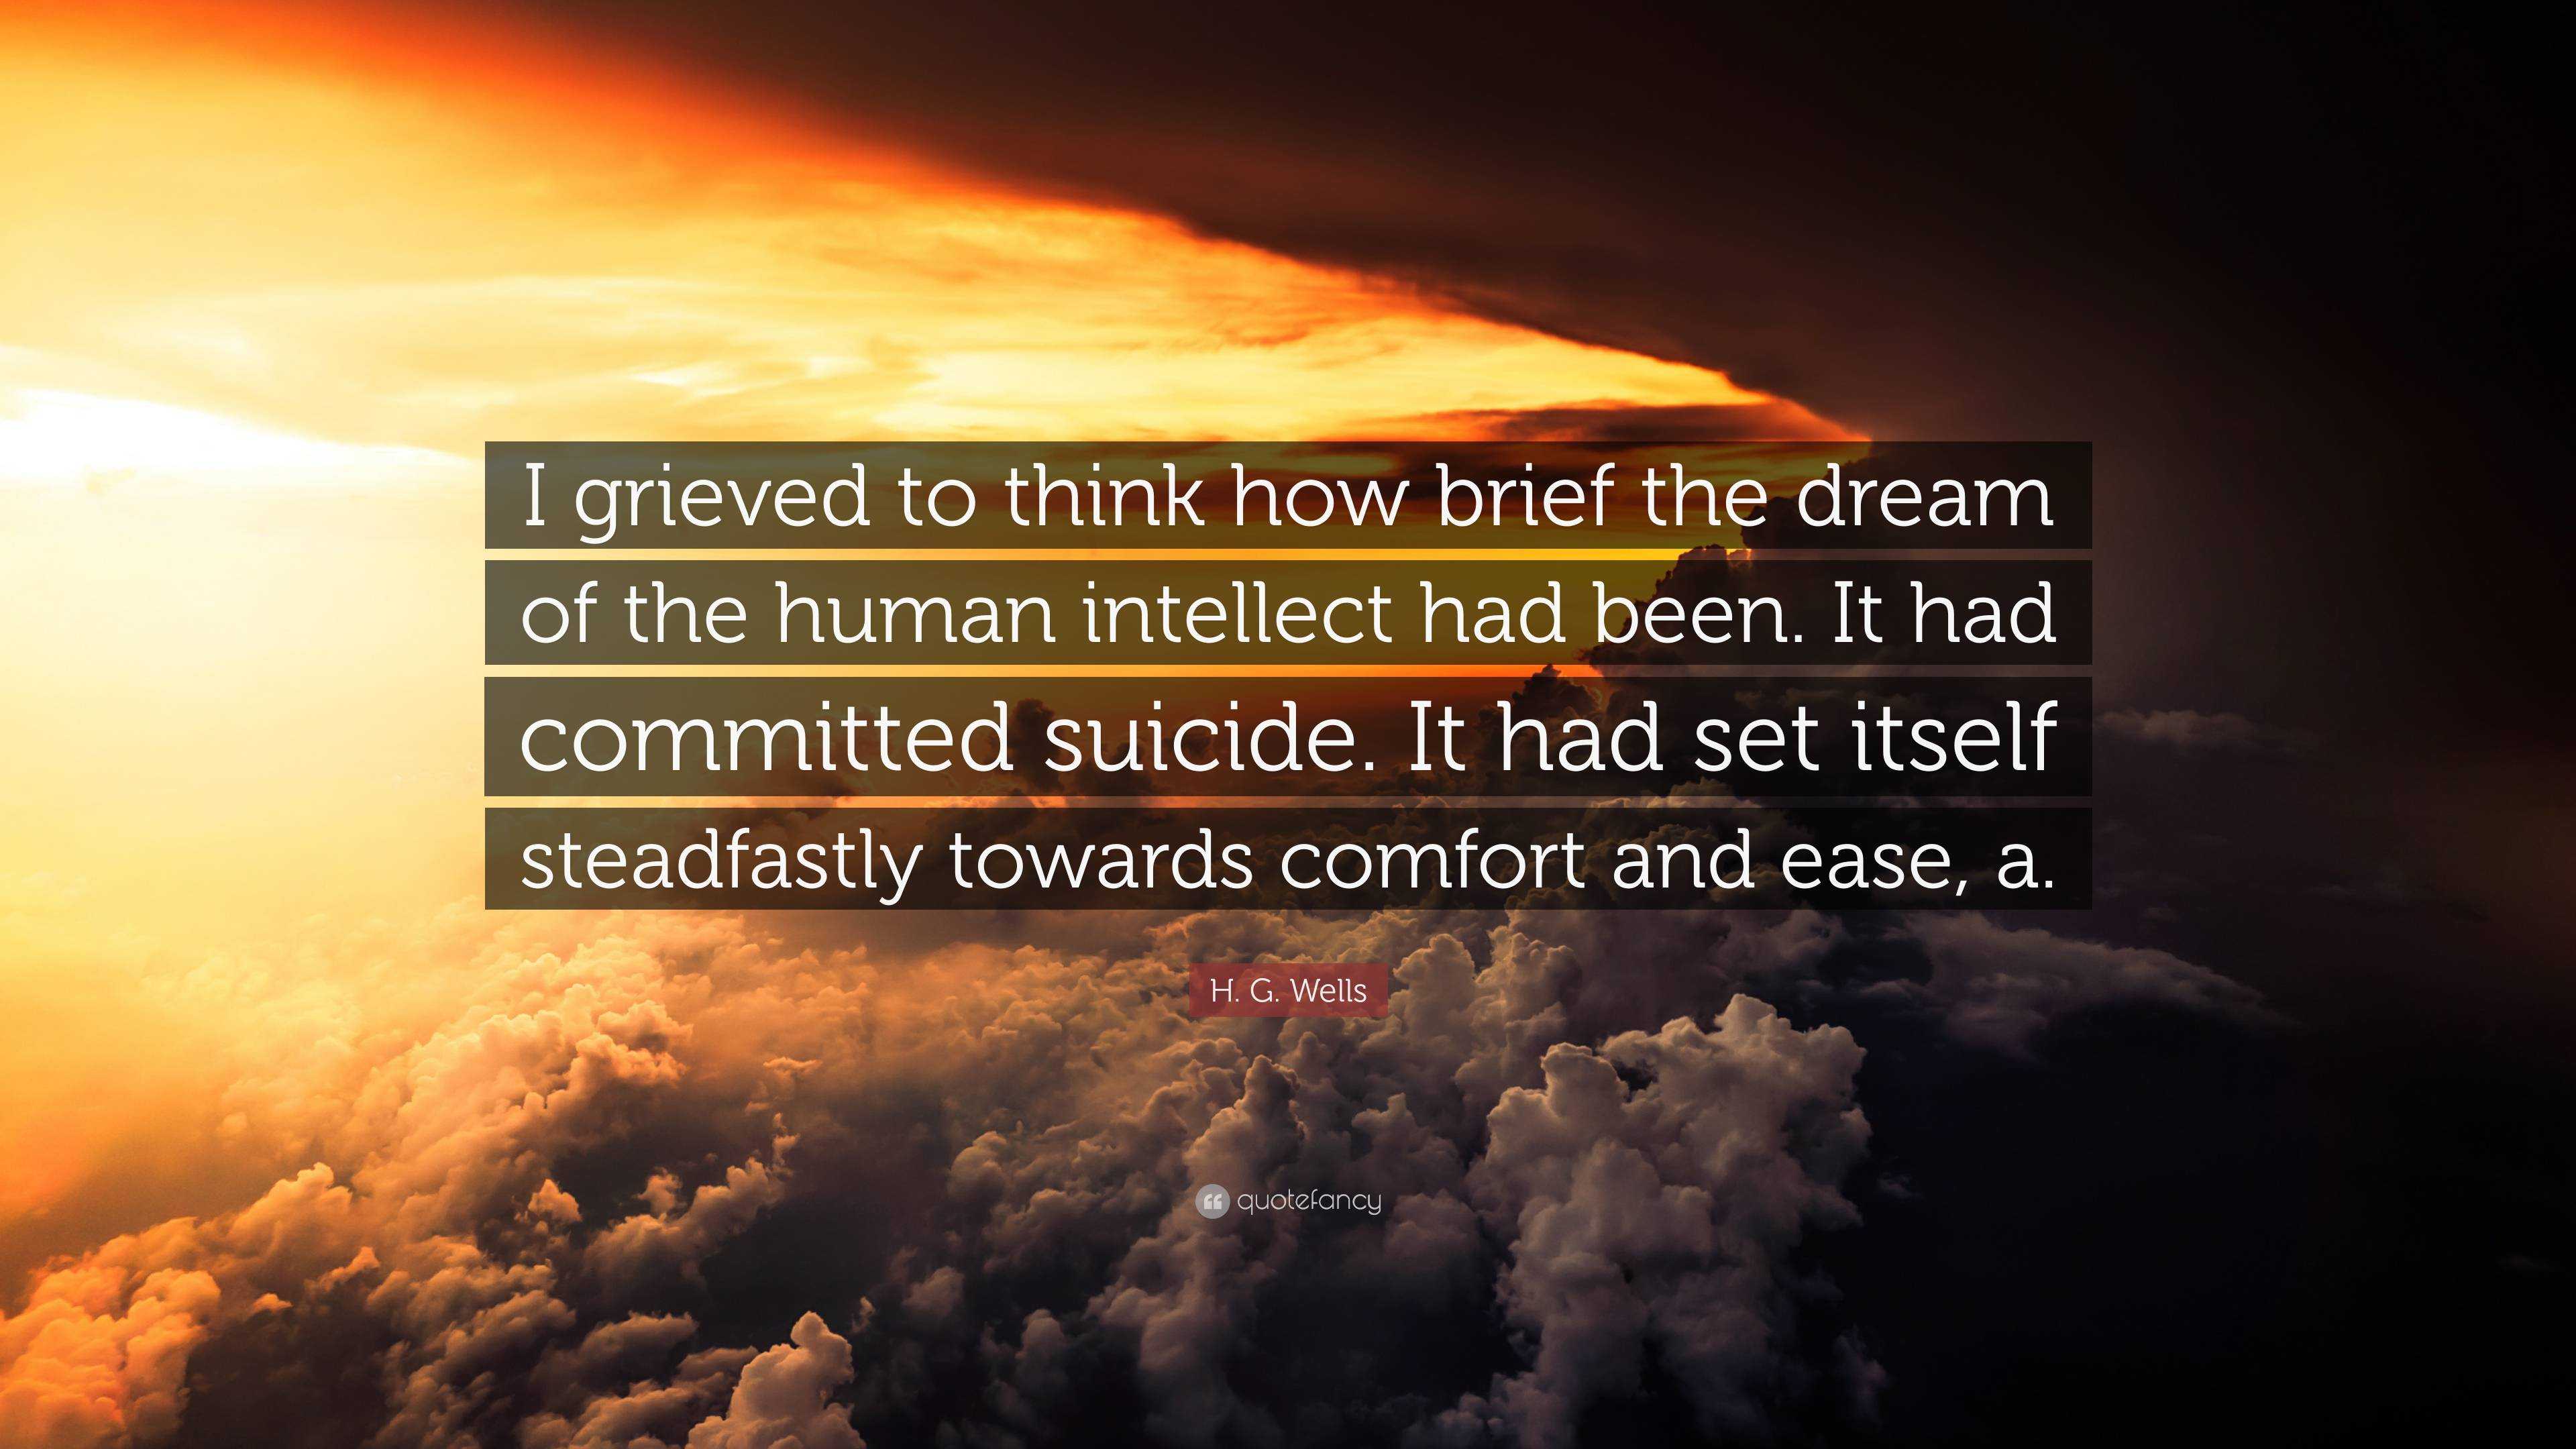 https://quotefancy.com/media/wallpaper/3840x2160/6887527-H-G-Wells-Quote-I-grieved-to-think-how-brief-the-dream-of-the.jpg